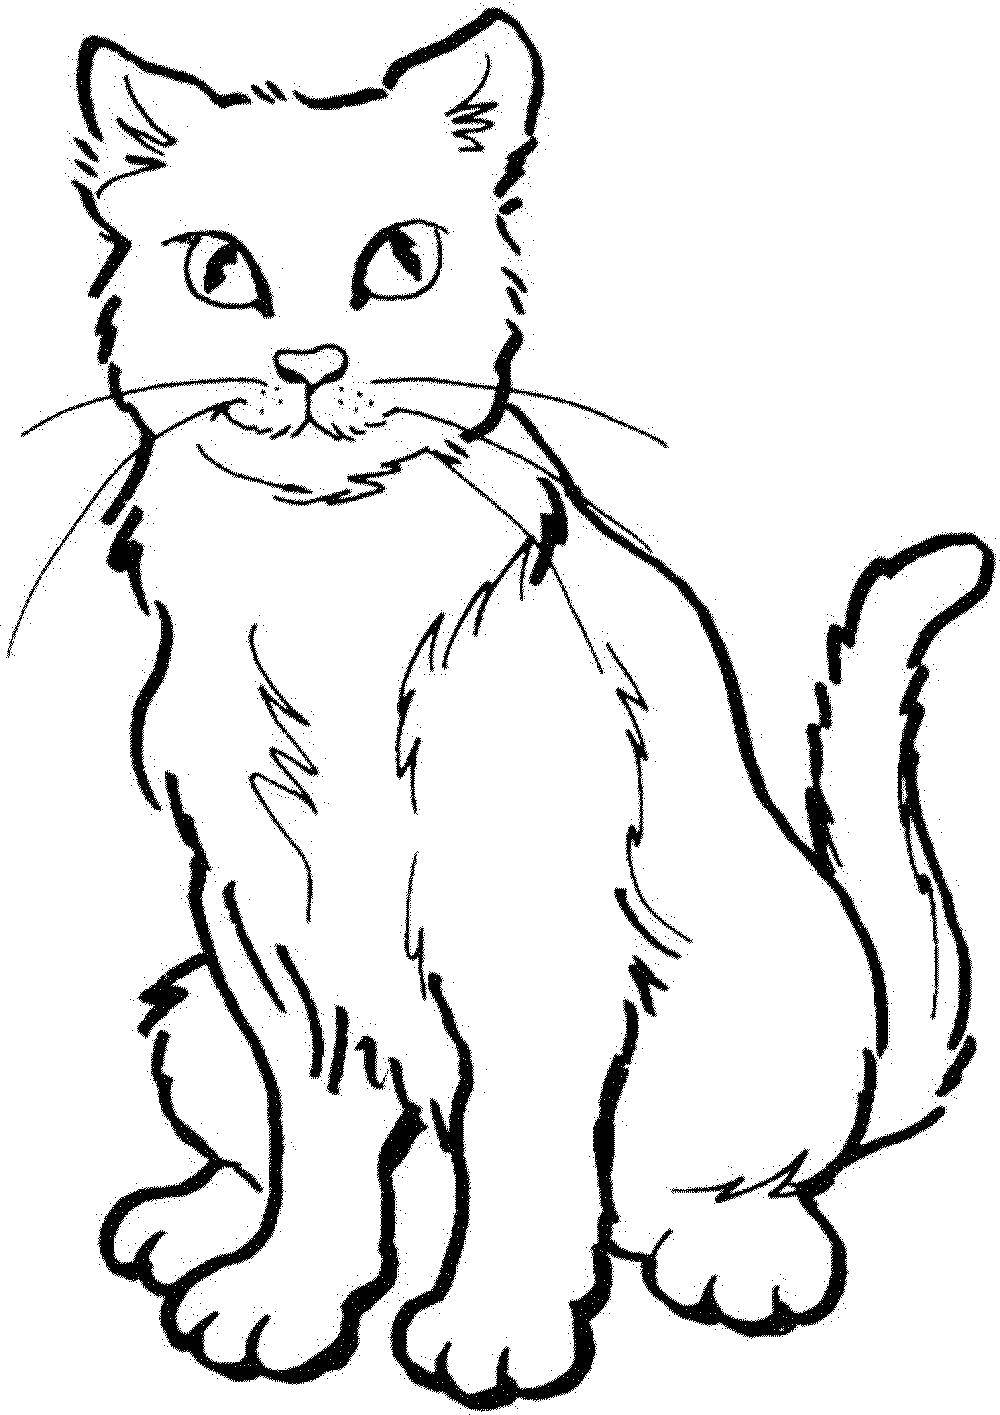 Coloring Kitty. Category Cats and kittens. Tags:  animals, kitten, cat.